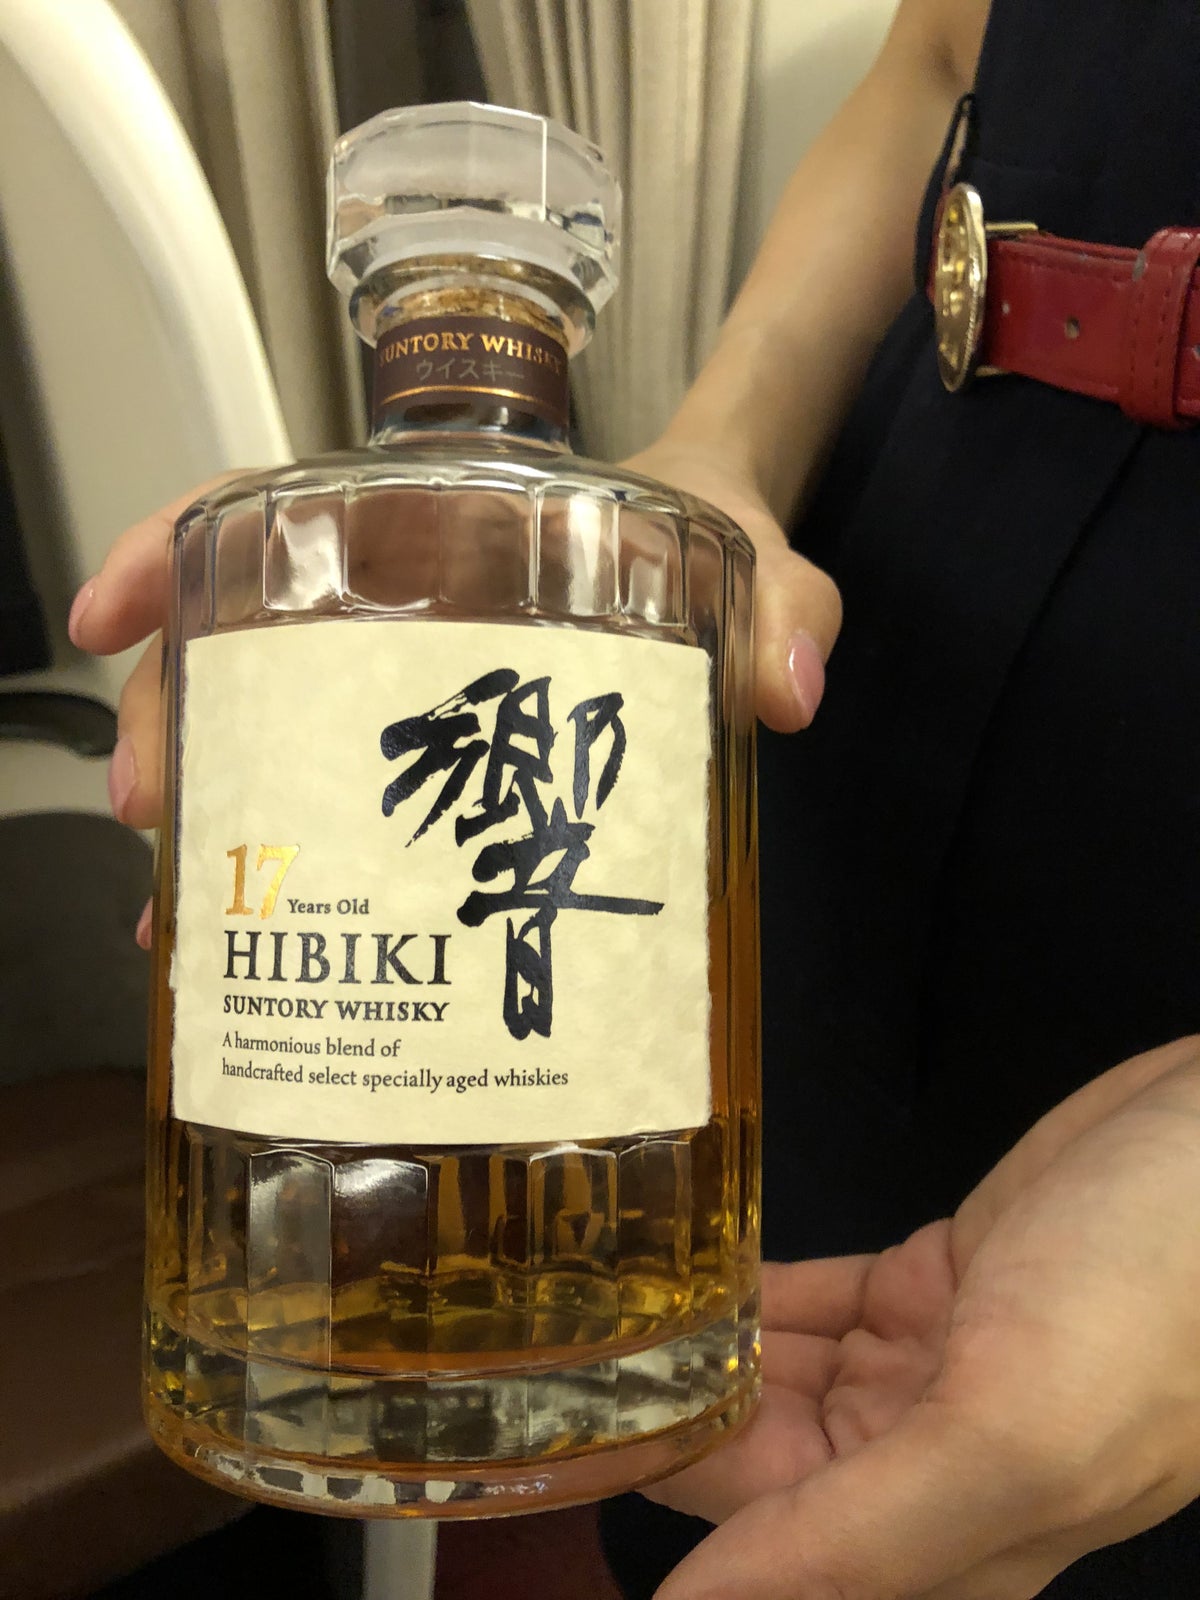 Japan Airlines 777 First Class Hibiki 17 Whisky